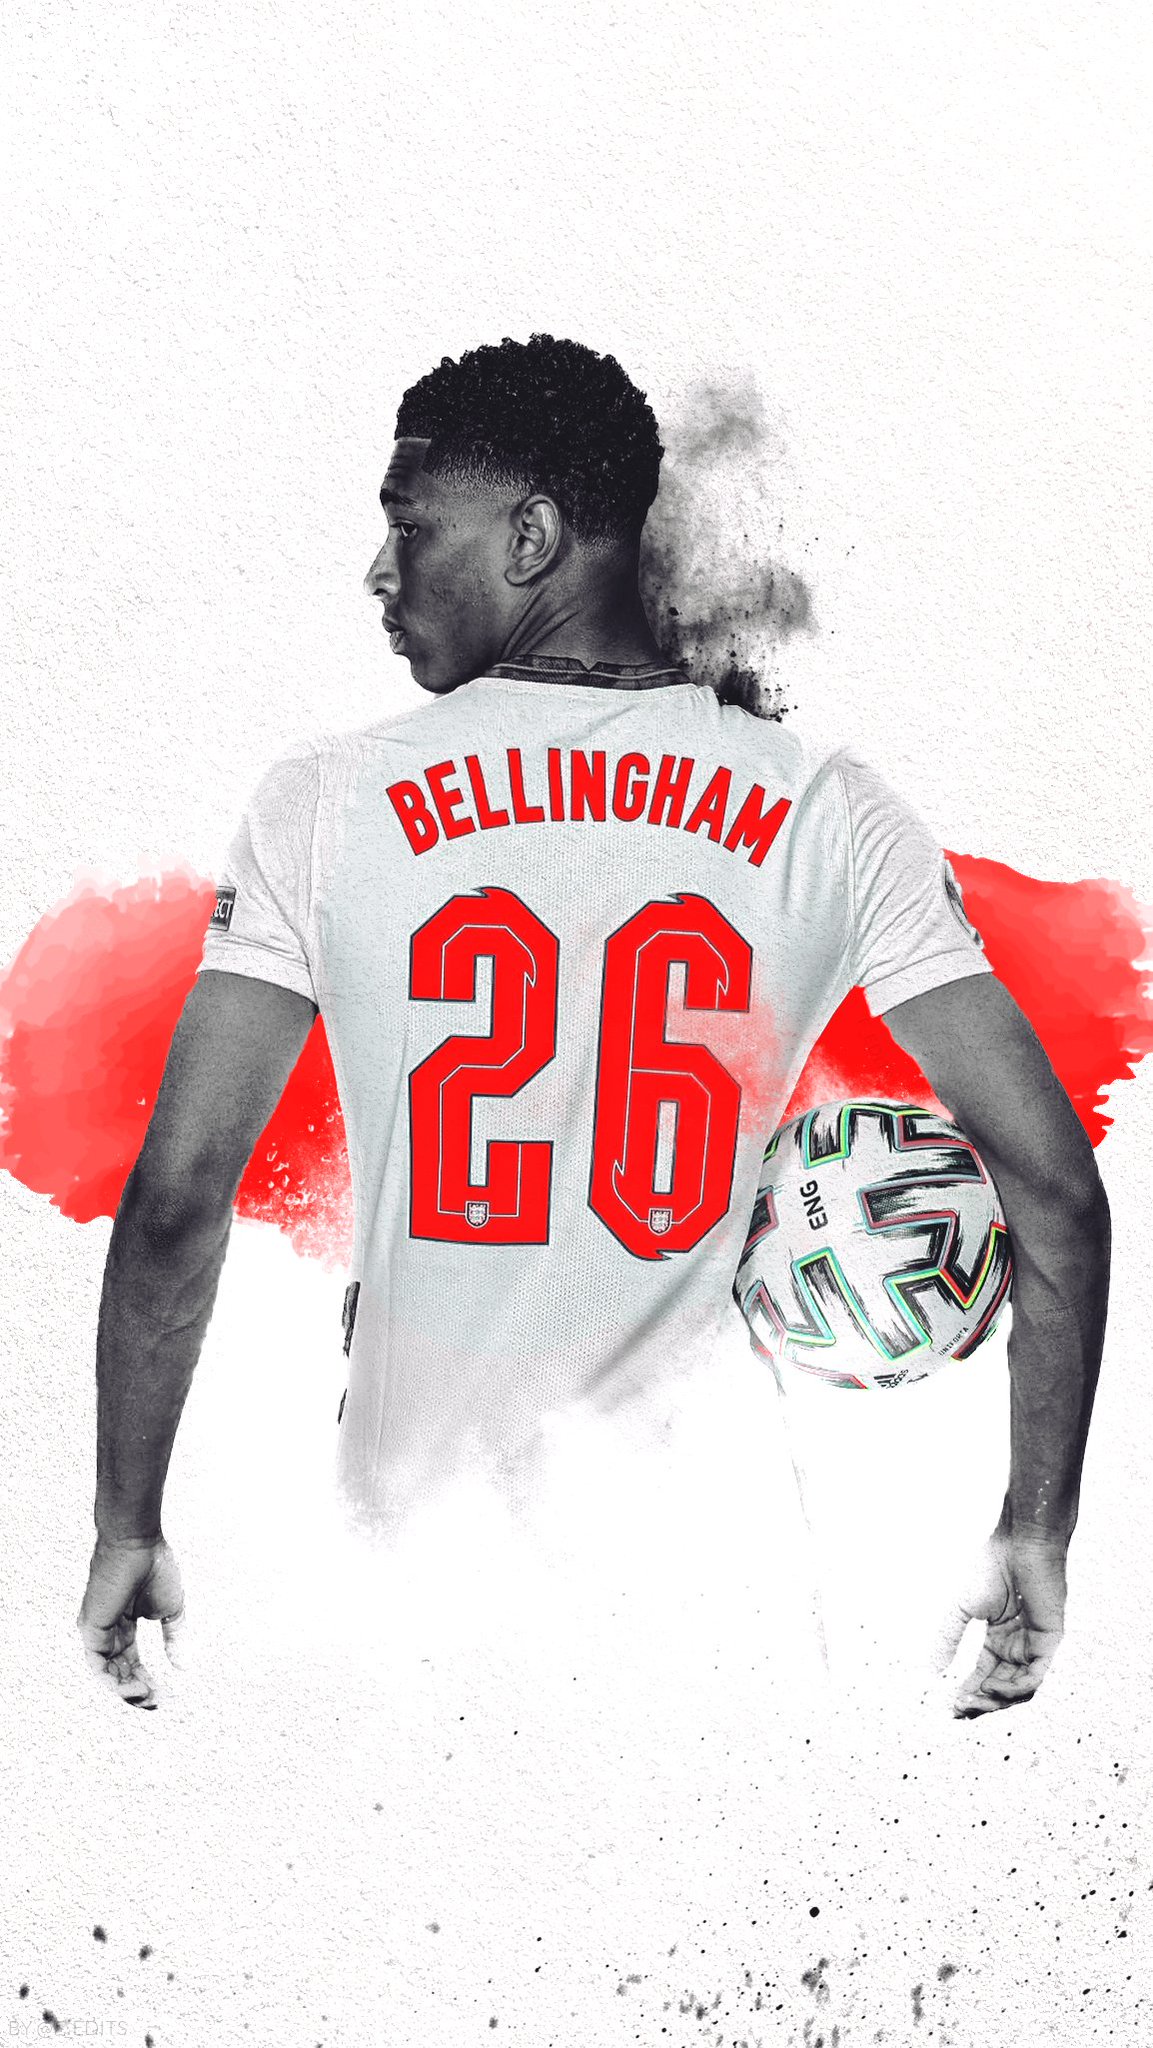 Fredrik Bellingham wallpaper. the youngest ever EURO player #EURO2020 #ENG